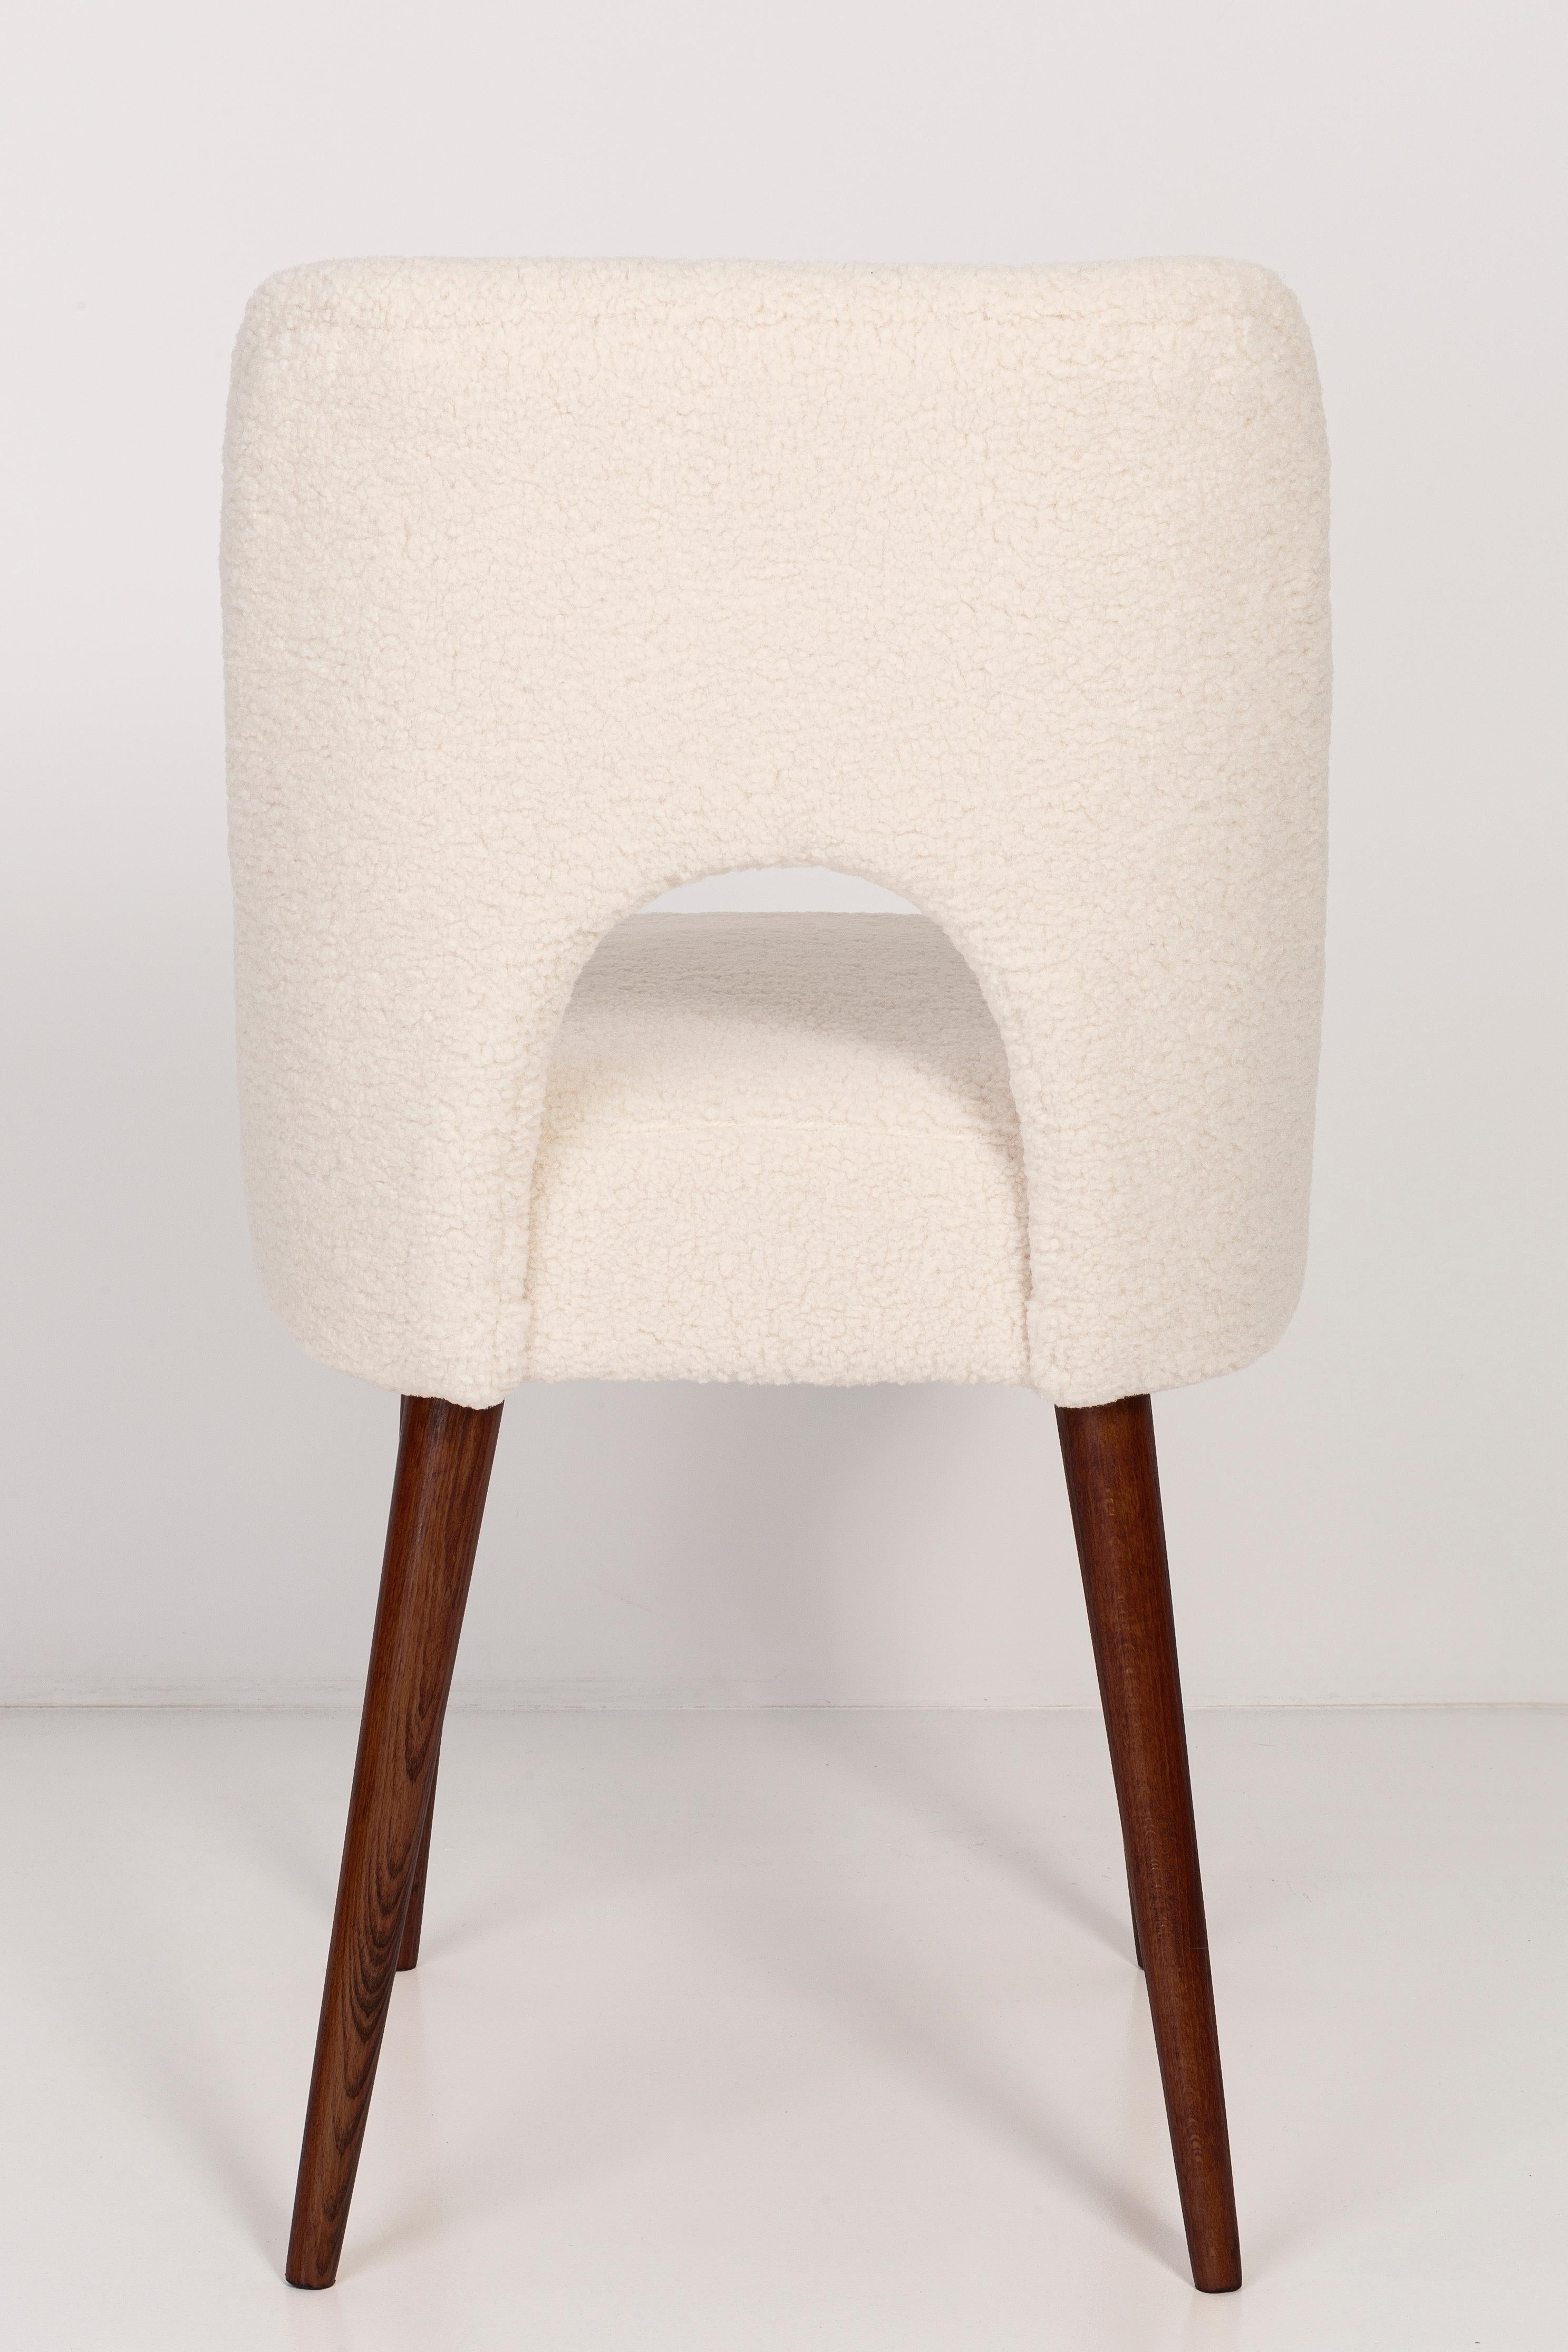 Textile Two Light Crème Boucle 'Shell' Chairs, 1960s For Sale